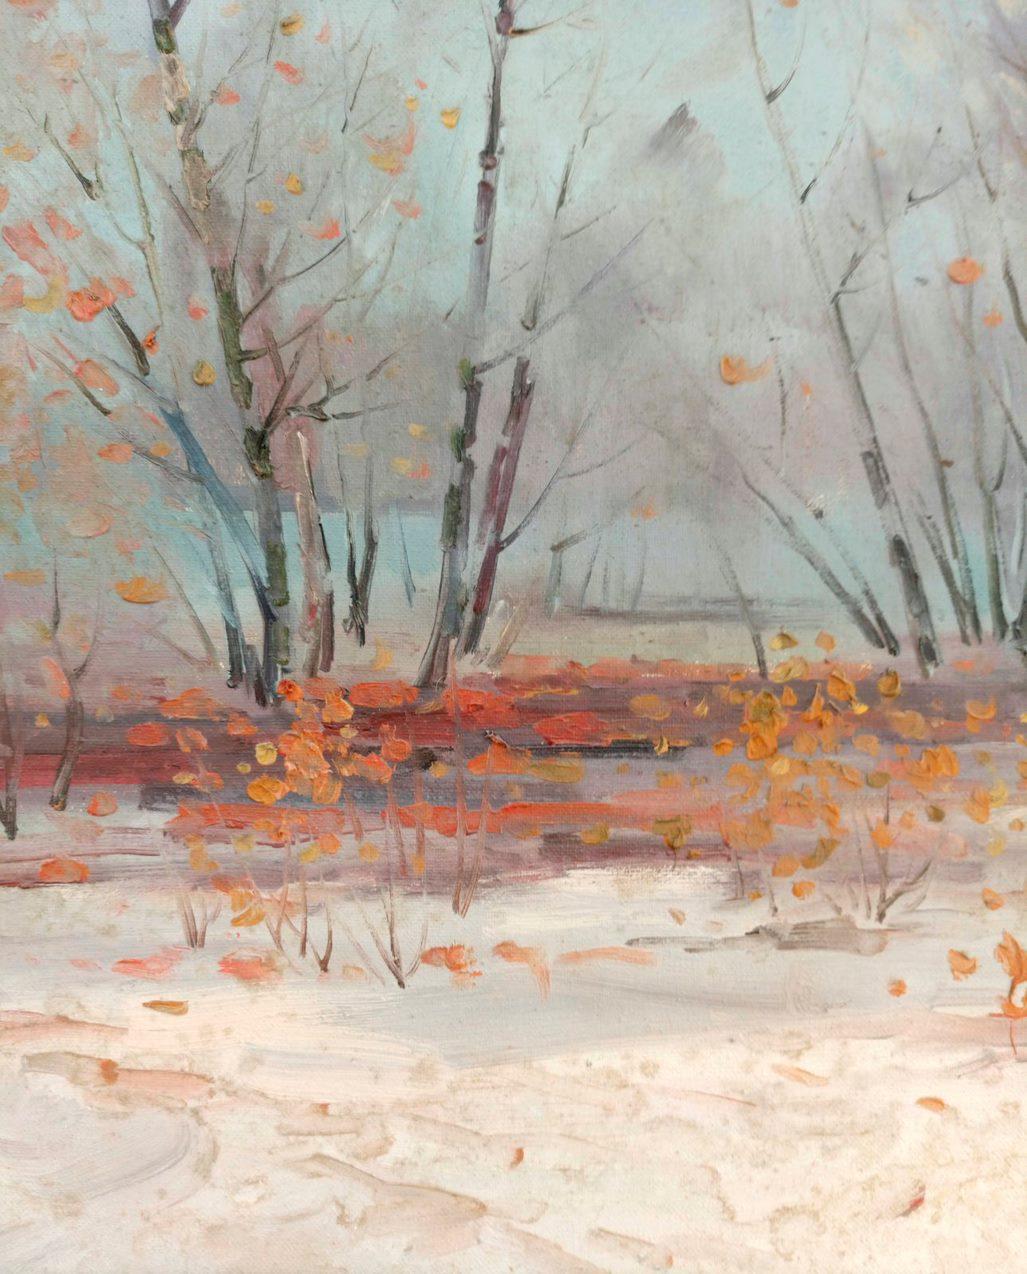 Artist: Peter Tovpev
Work: Original oil painting, handmade artwork, one of a kind 
Medium: Oil on Canvas 
Year: 2023
Style: Impressionism
Title: Early Winter
Size: 21.5